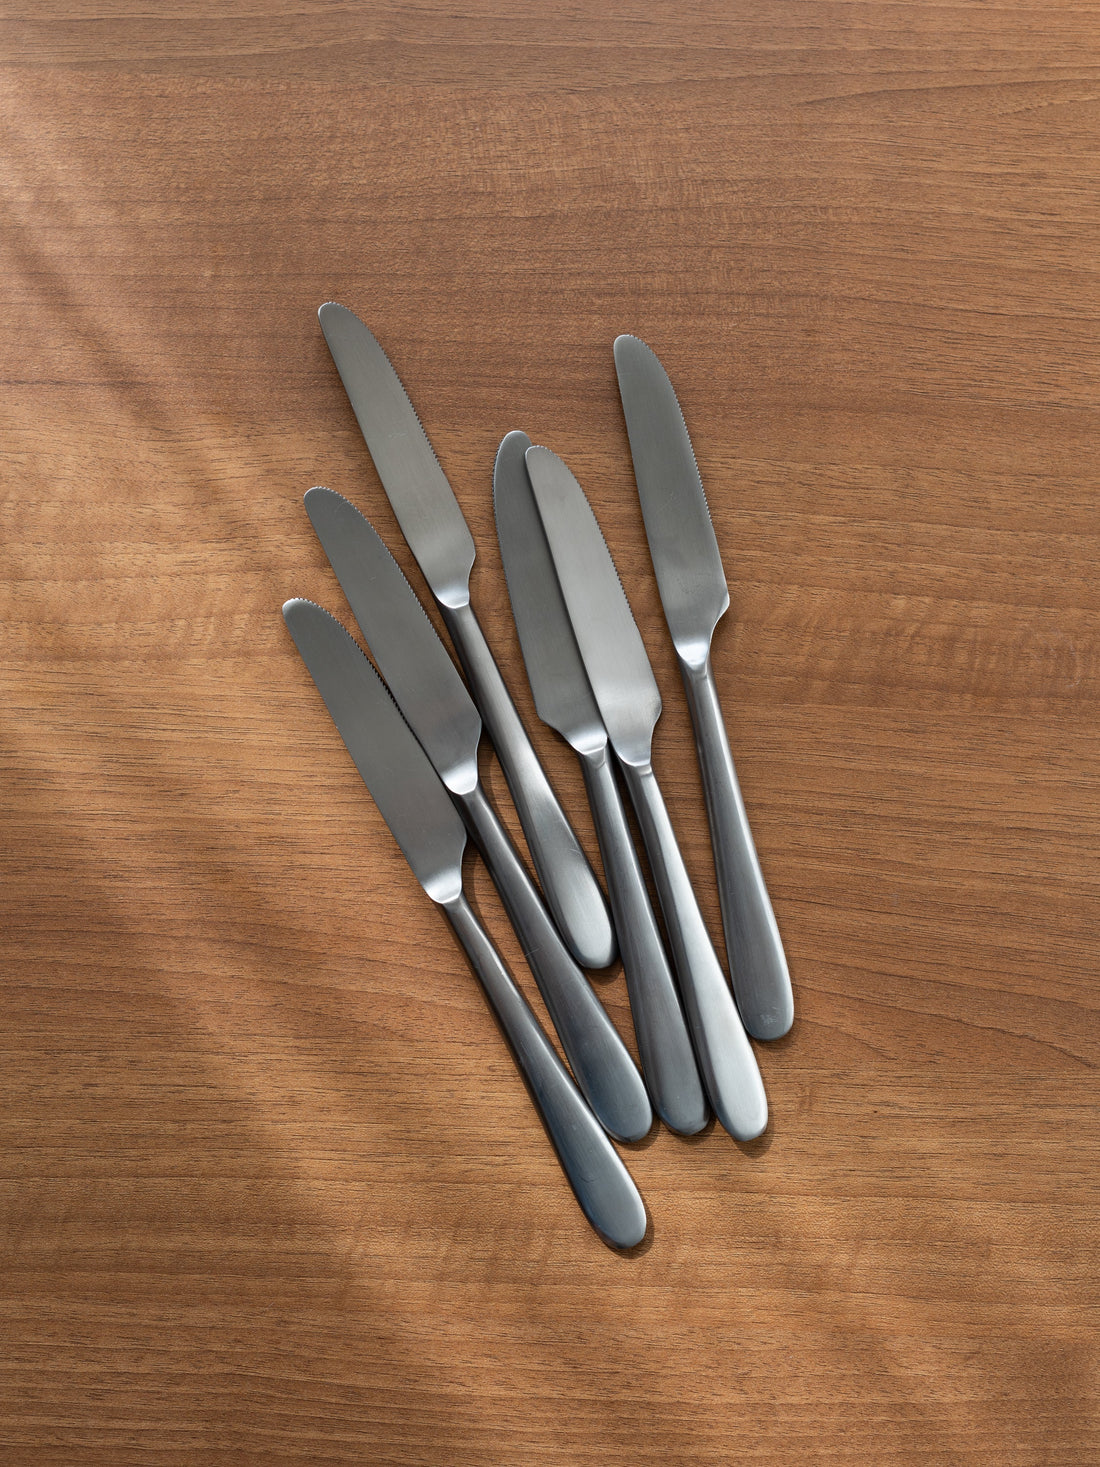 Willow high quality stainless steel table knives by Fleck